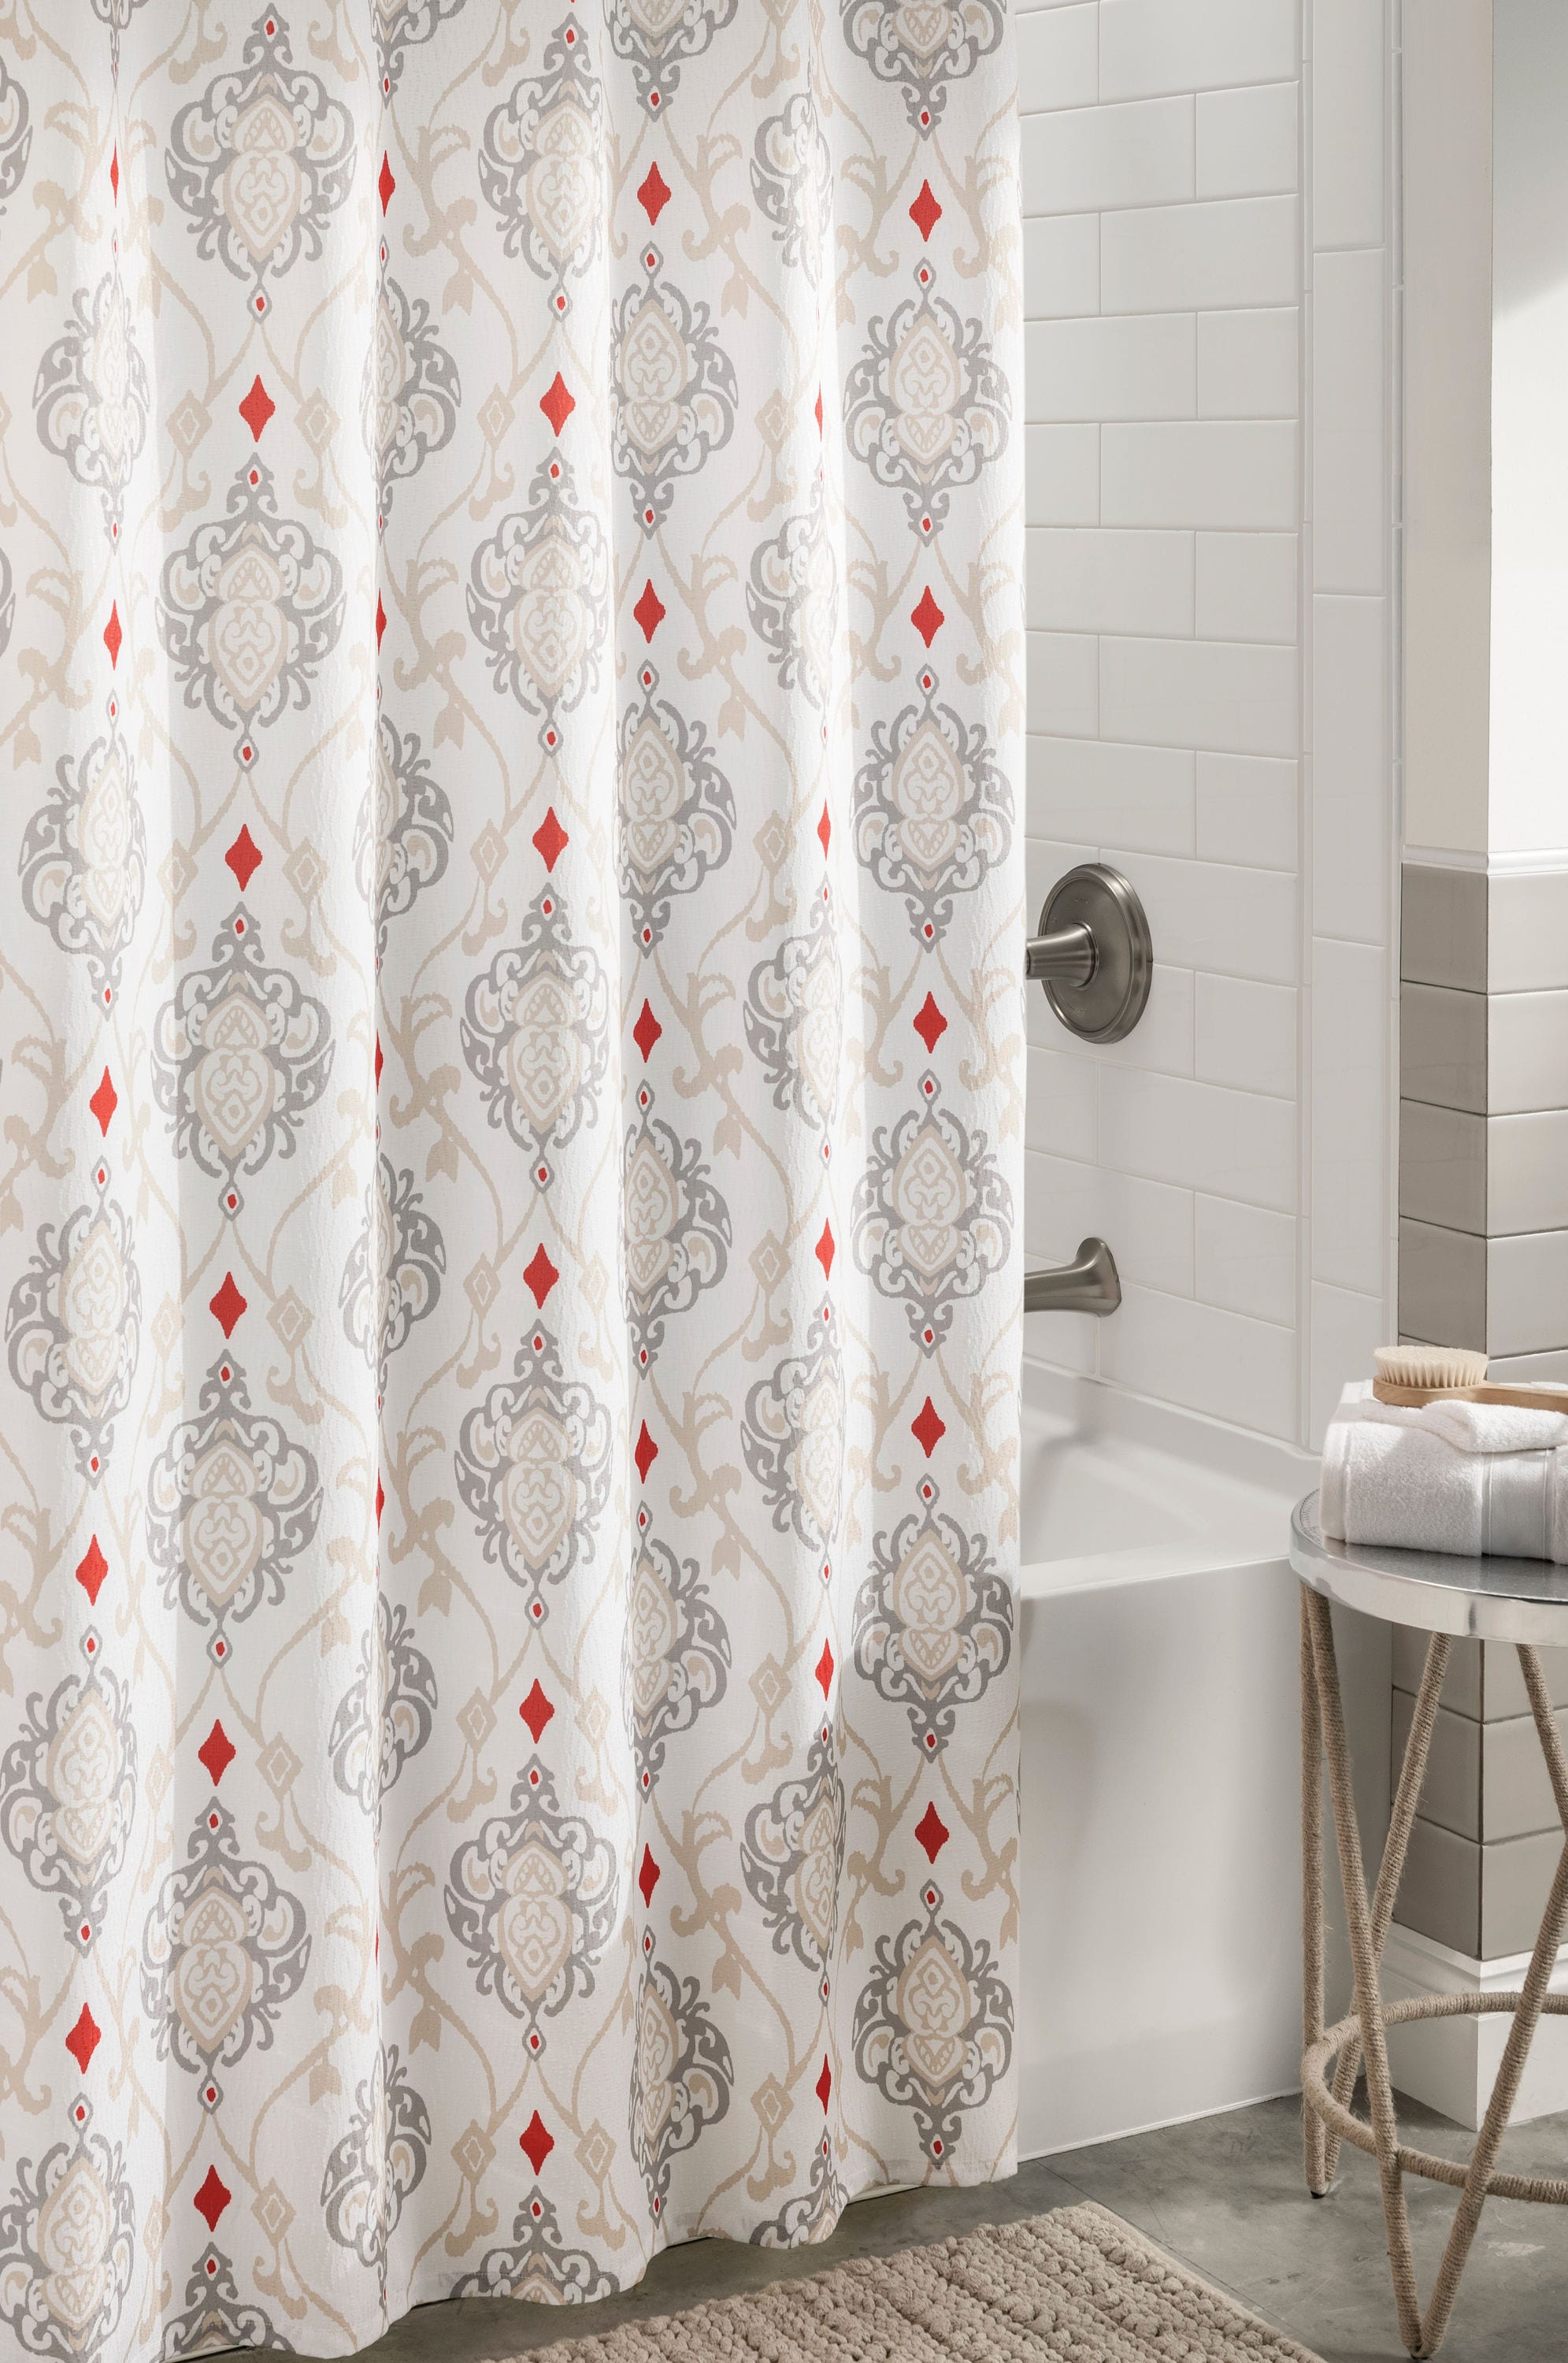 Polyester Grey Patterned Shower Curtain, Do Polyester Shower Curtains Need A Liner